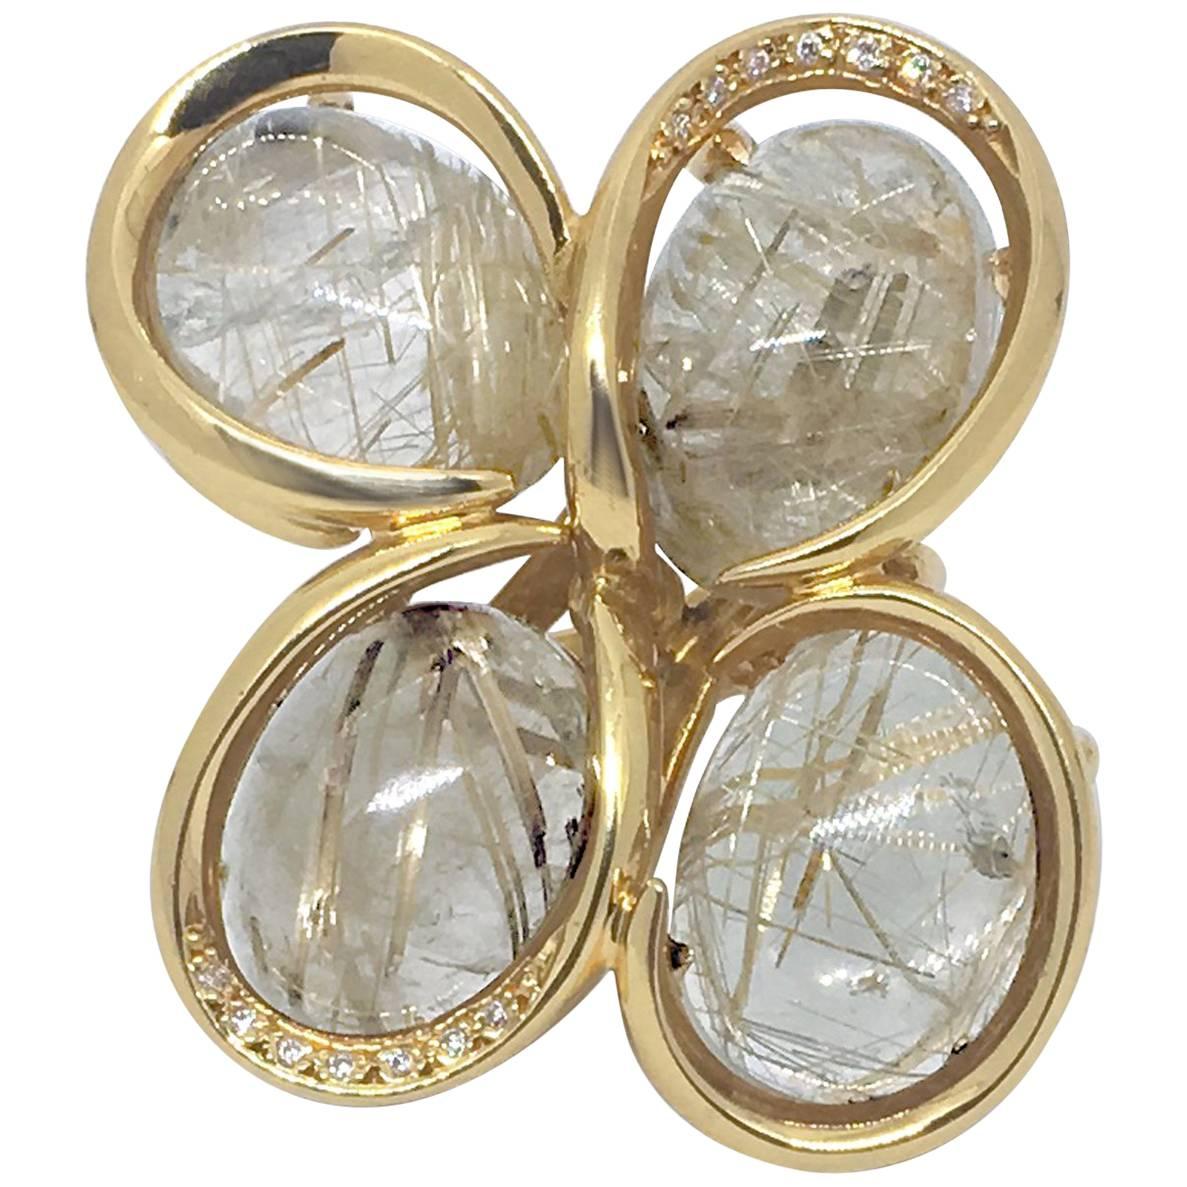 LALAoUNIS One of a Kind 18 Karat Gold Rutilated Quartz Diamond Cocktail Ring For Sale